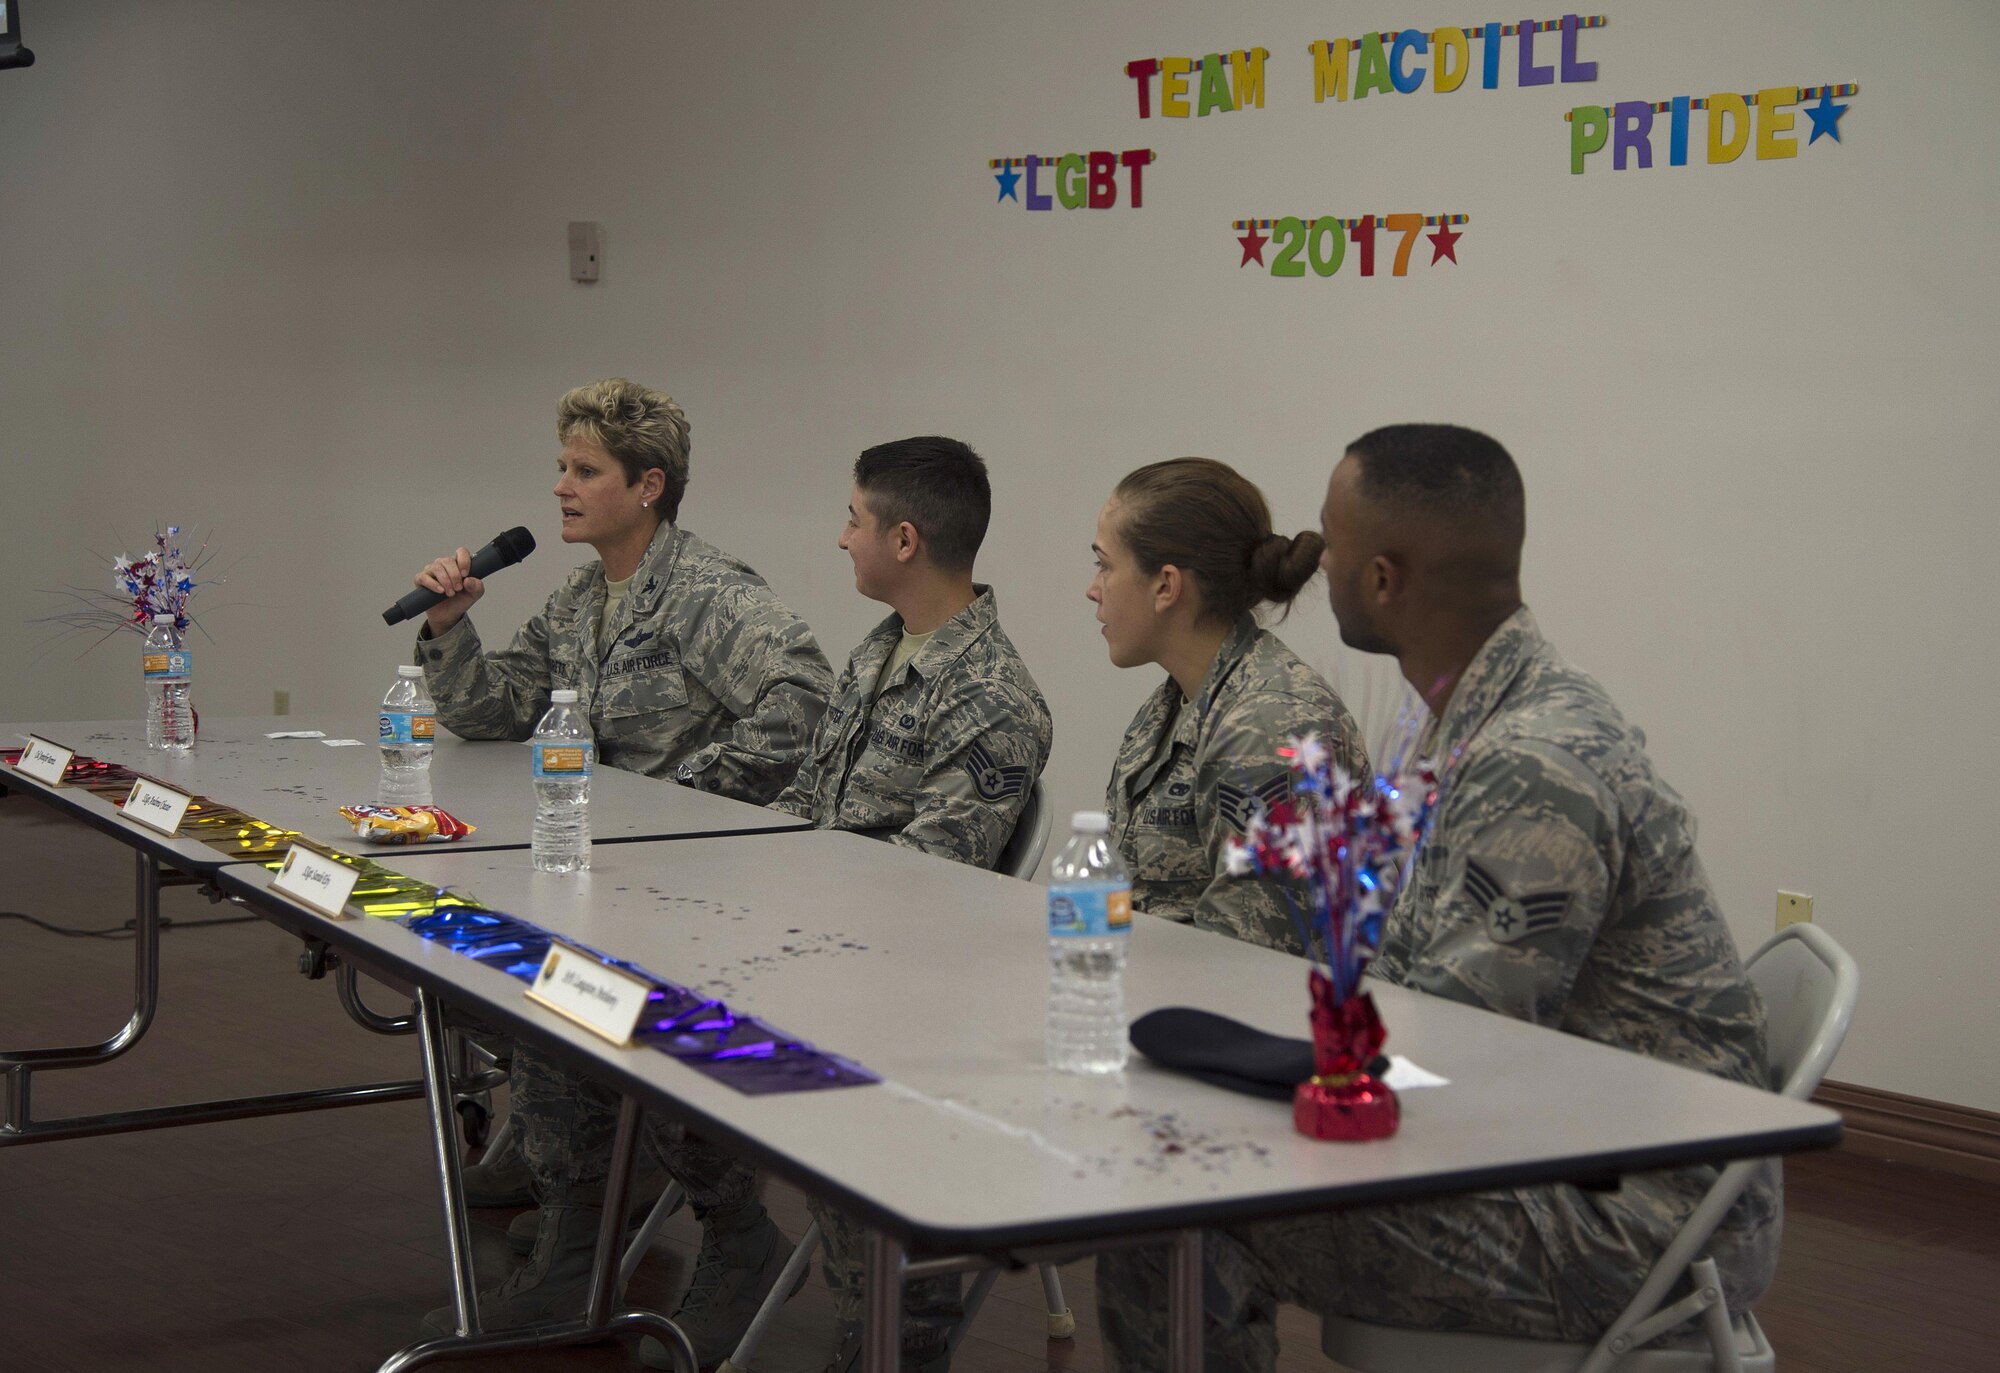 U.S. Air Force Col. Jennifer Barrett, vice commander of the 6th Air Mobility Wing, speaks as a panel member during a Pride Luncheon at MacDill Air Force Base, Fla., June 15, 2017. The purpose of the luncheon was to increase education throughout the wing in regards to Pride Month and the lesbian, gay, bisexual, and transgender community. (U.S. Air Force Photo by Airman 1st Class Ashley Perdue)